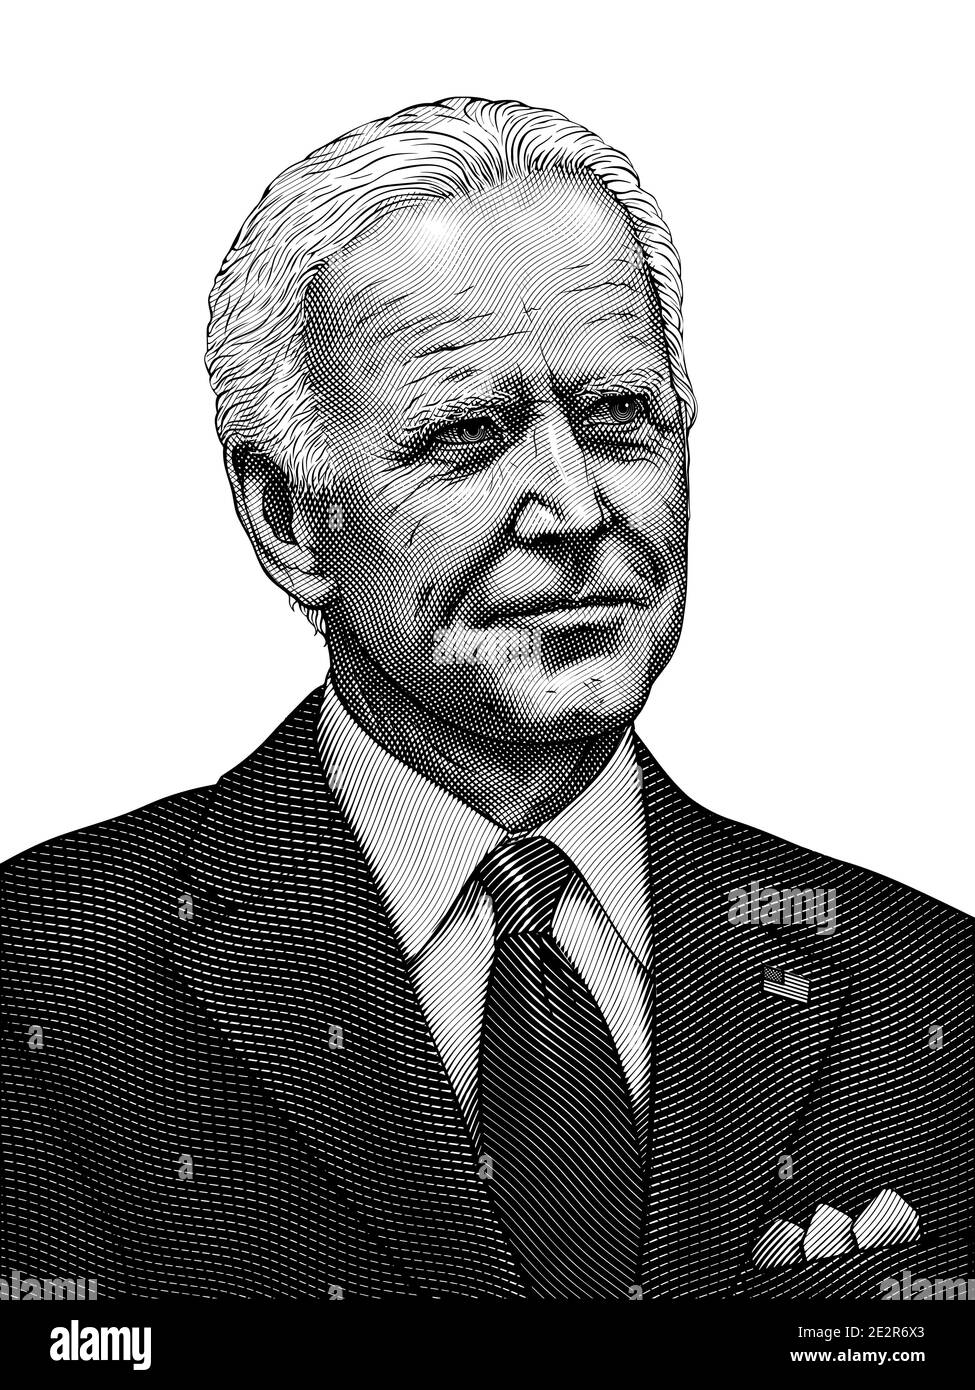 Joe Biden. New President of United States. Original vector engraving. Black and white isolated portrait of American leader in the vintage style. Stock Vector